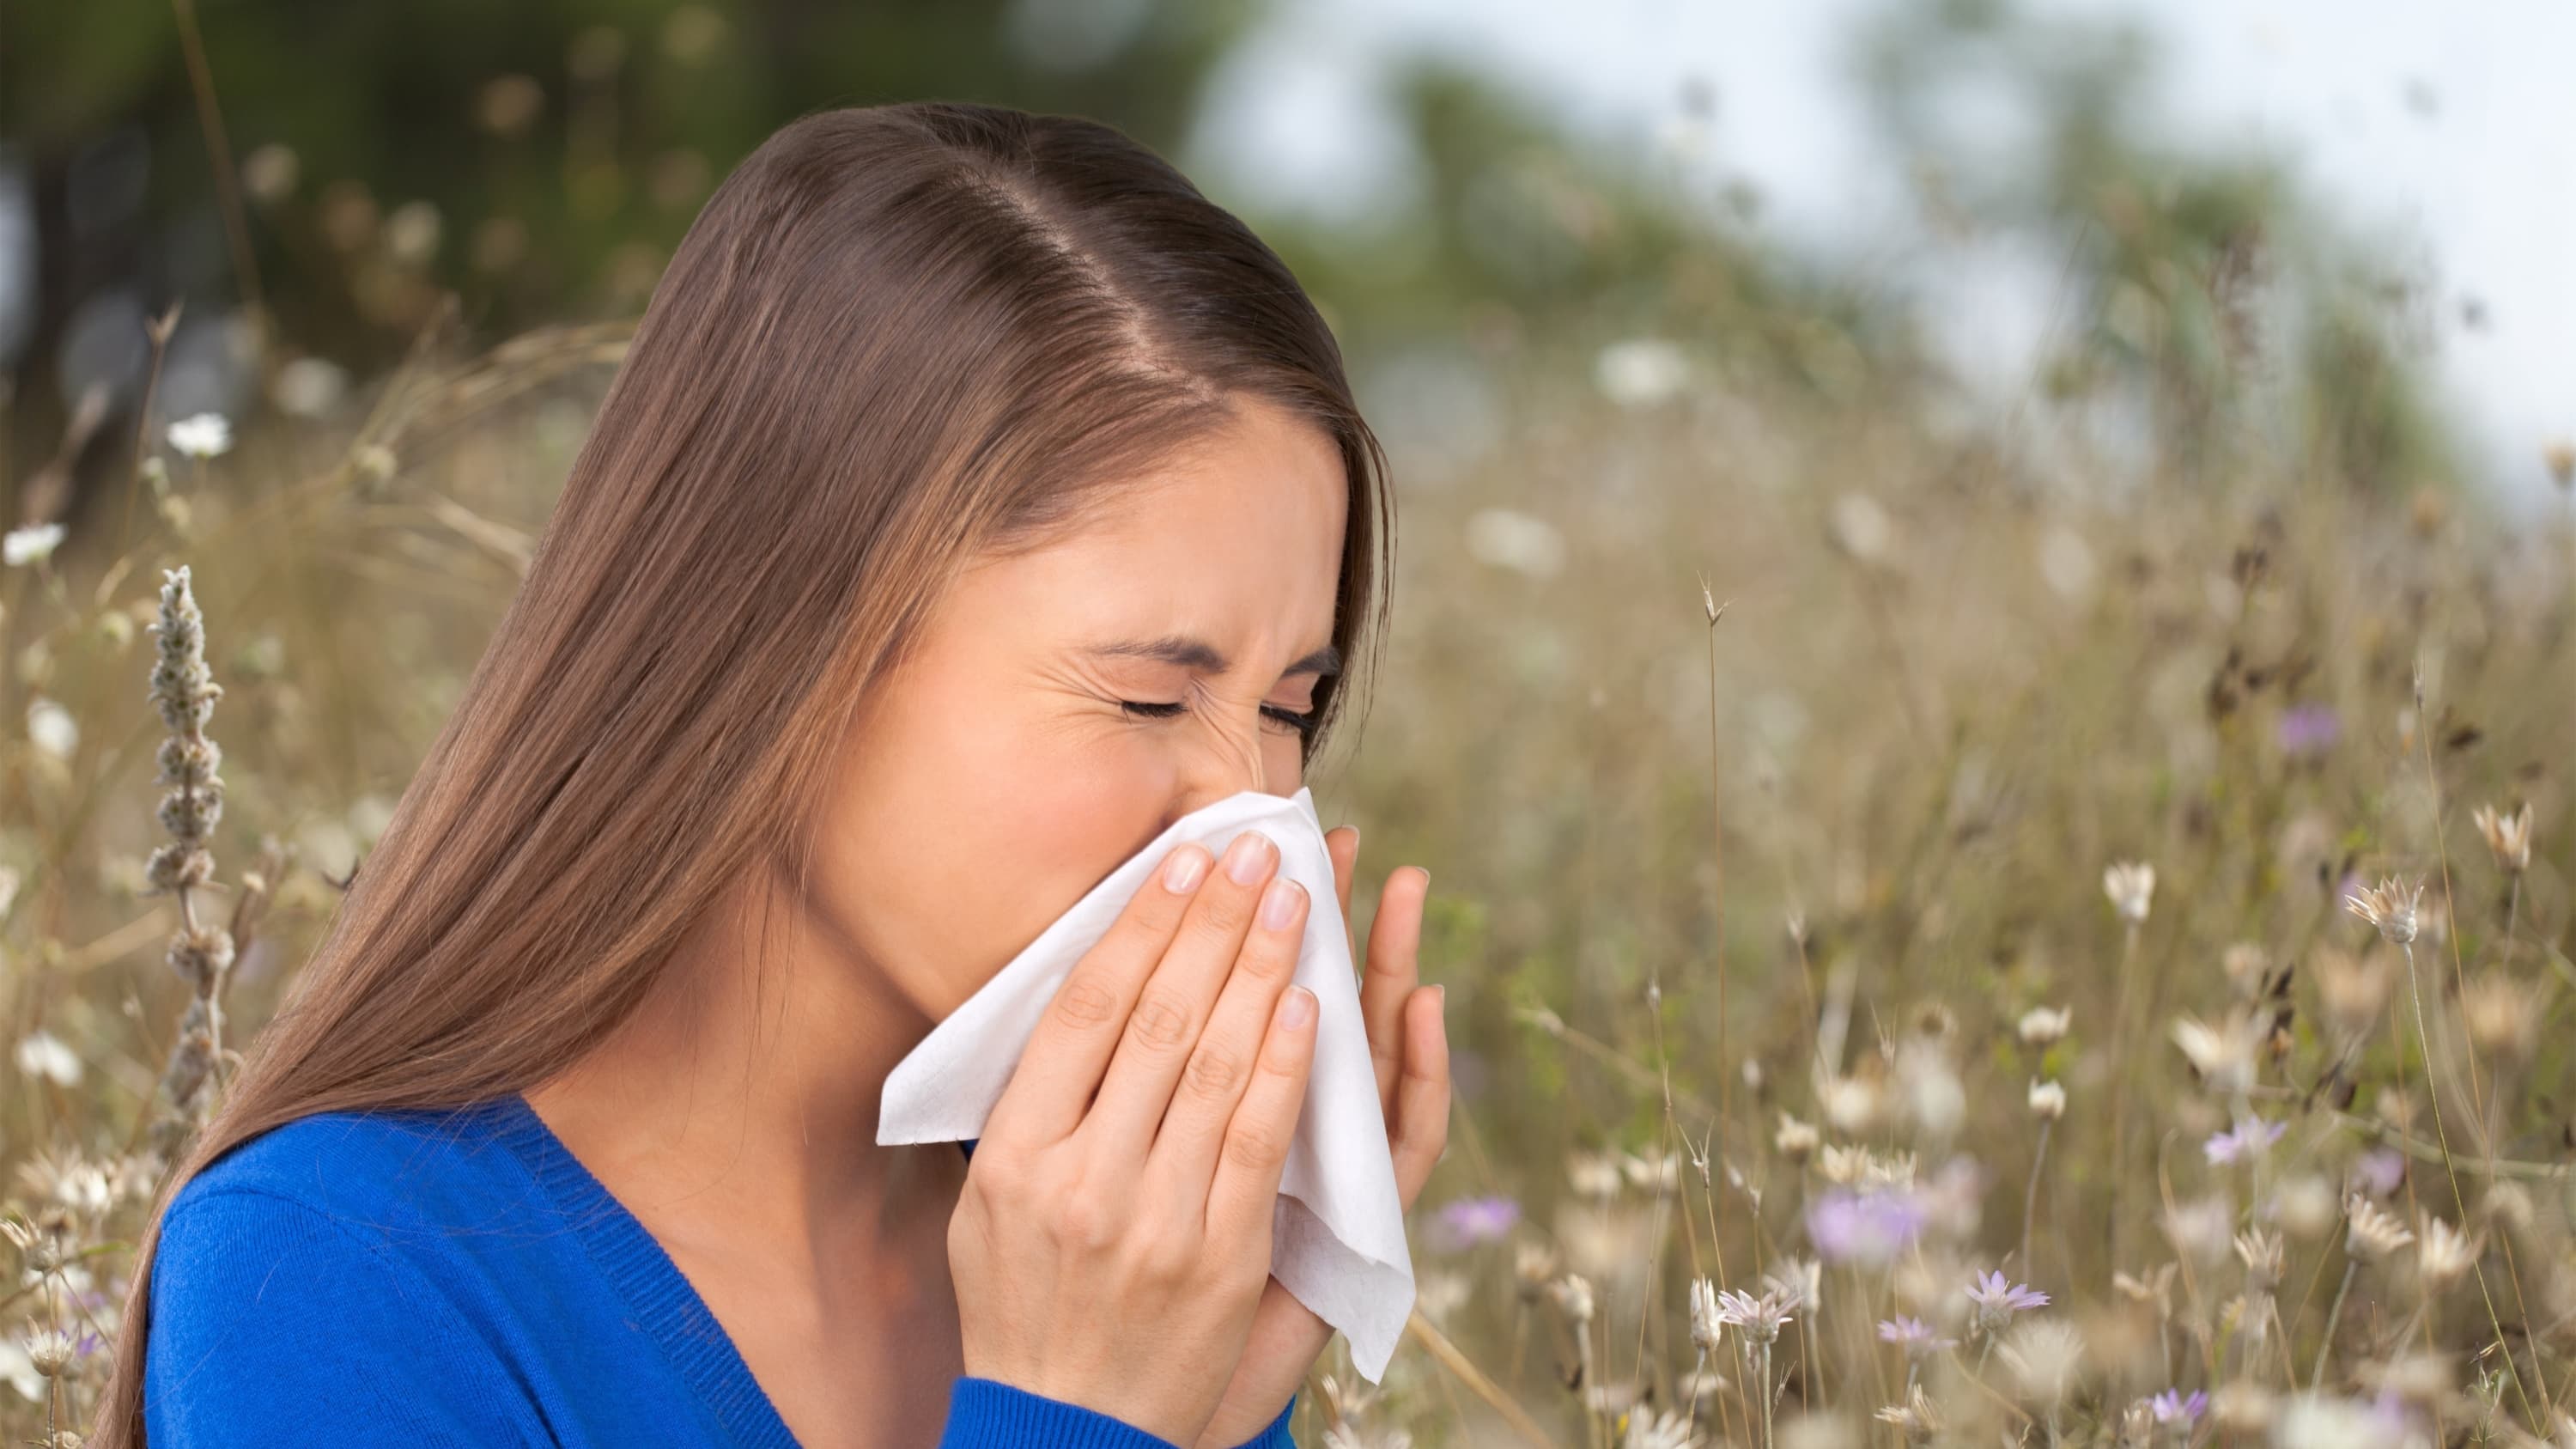 A woman in a blue shirt who has seasonal allergies sneezes into a tissue outside.